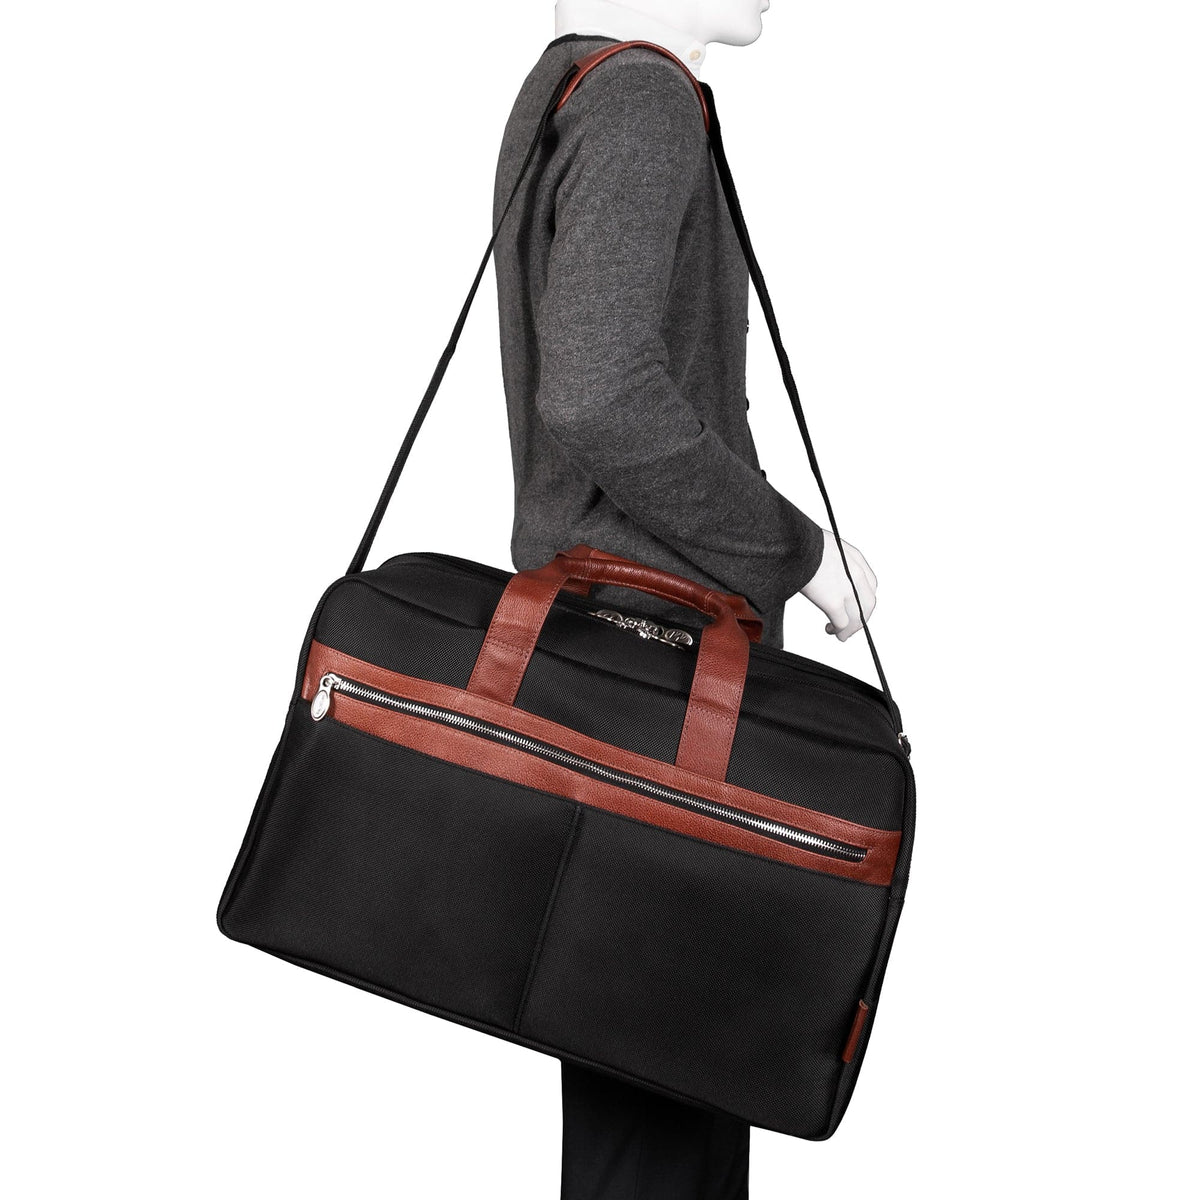 McKlein U Series Wellington 21" Two-tone Dual-Compartment Laptop and Tablet Carry-All Nylon Duffel Bag